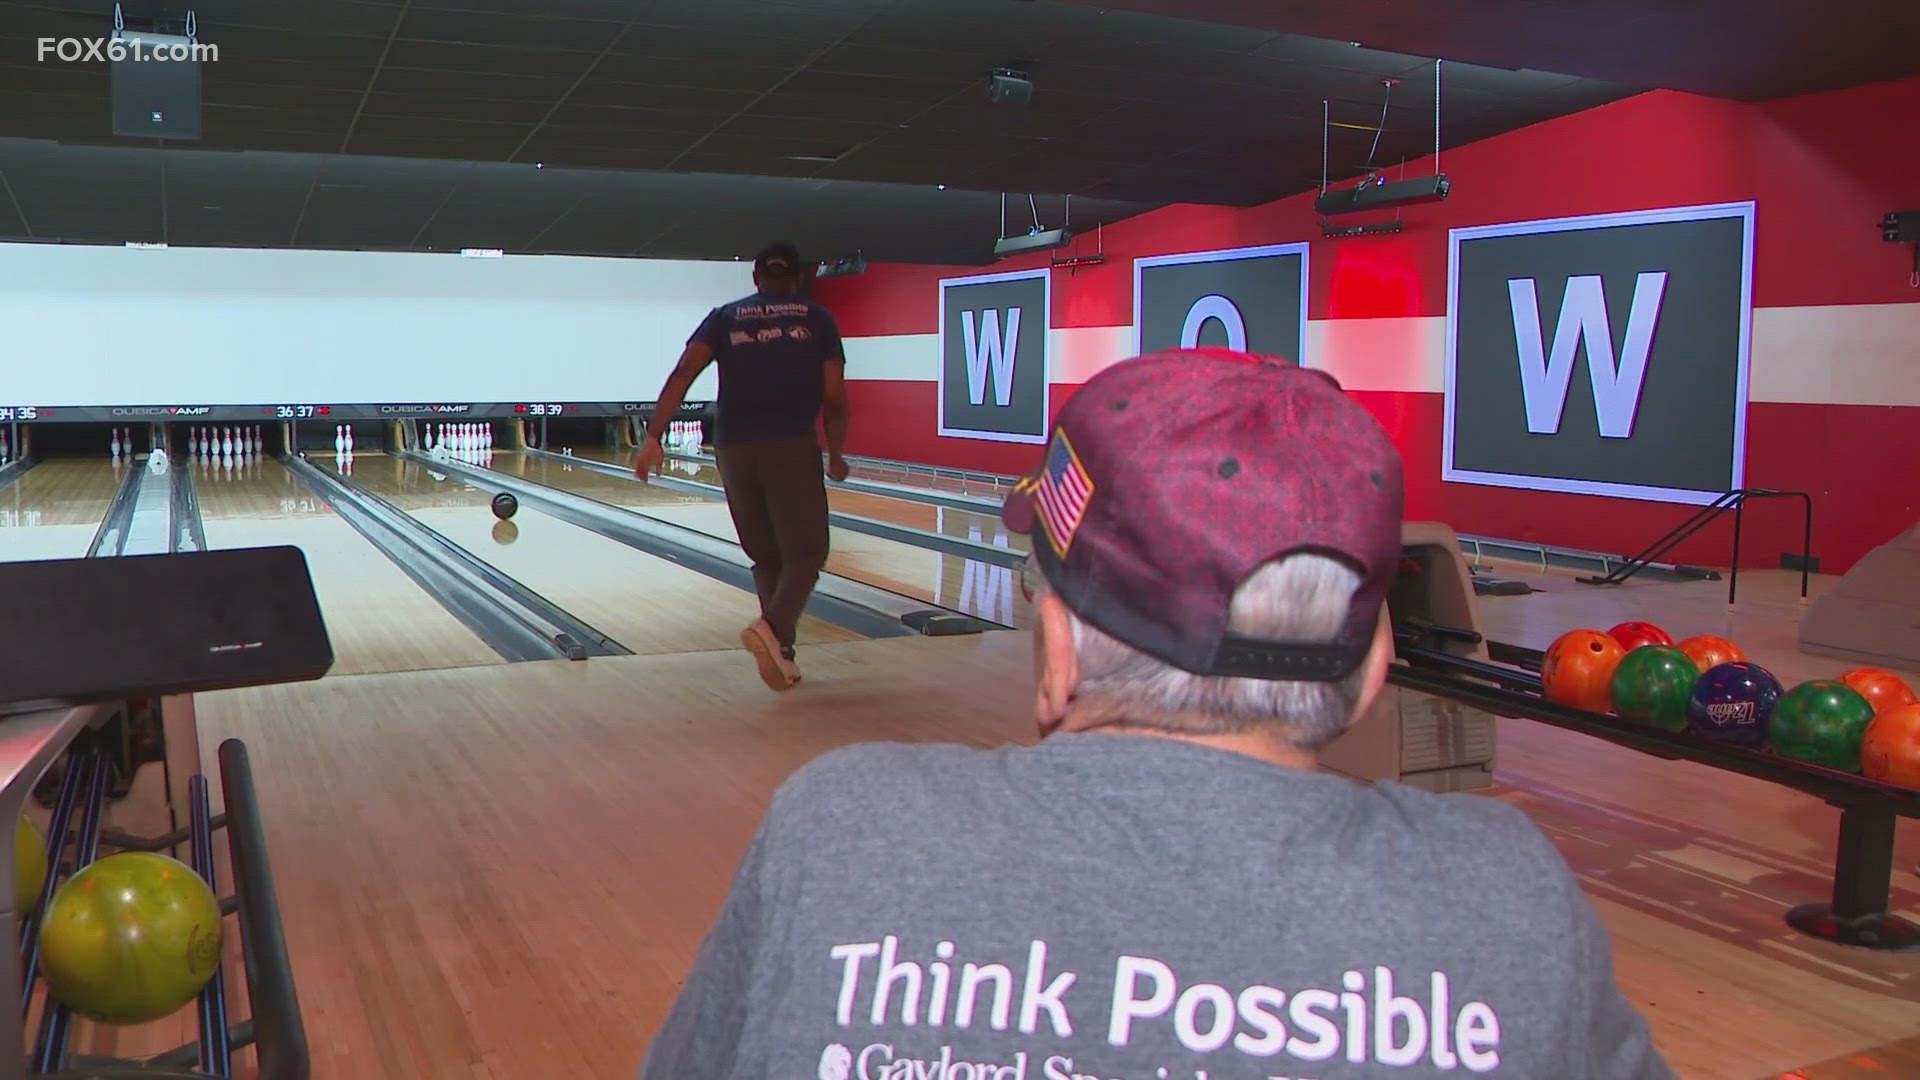 The Gaylord Hospital Sports Association is giving veterans with a disability, impairment or PTSD a chance to hit the lanes with a new adaptive bowling program.